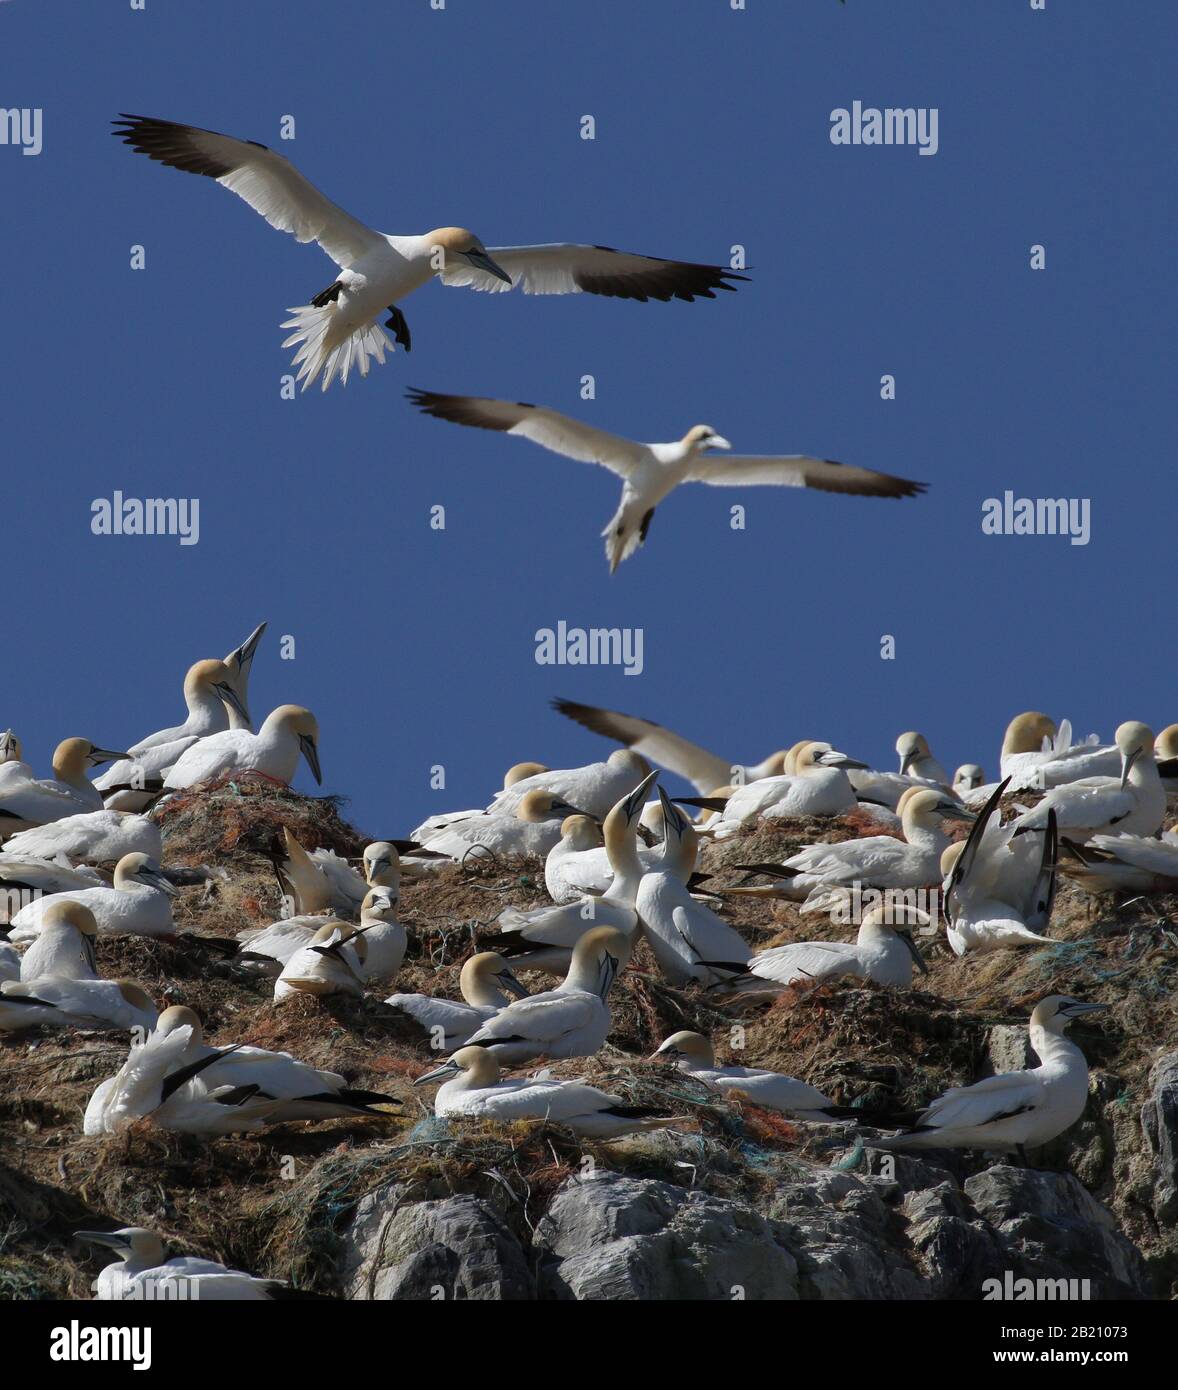 A Collection Of Gannets, Morus bassanus, Nesting On Nests Made Of Different Types Of Plastic Including Ropes, Discarded Fishing Nets. Grassholme UK Stock Photo